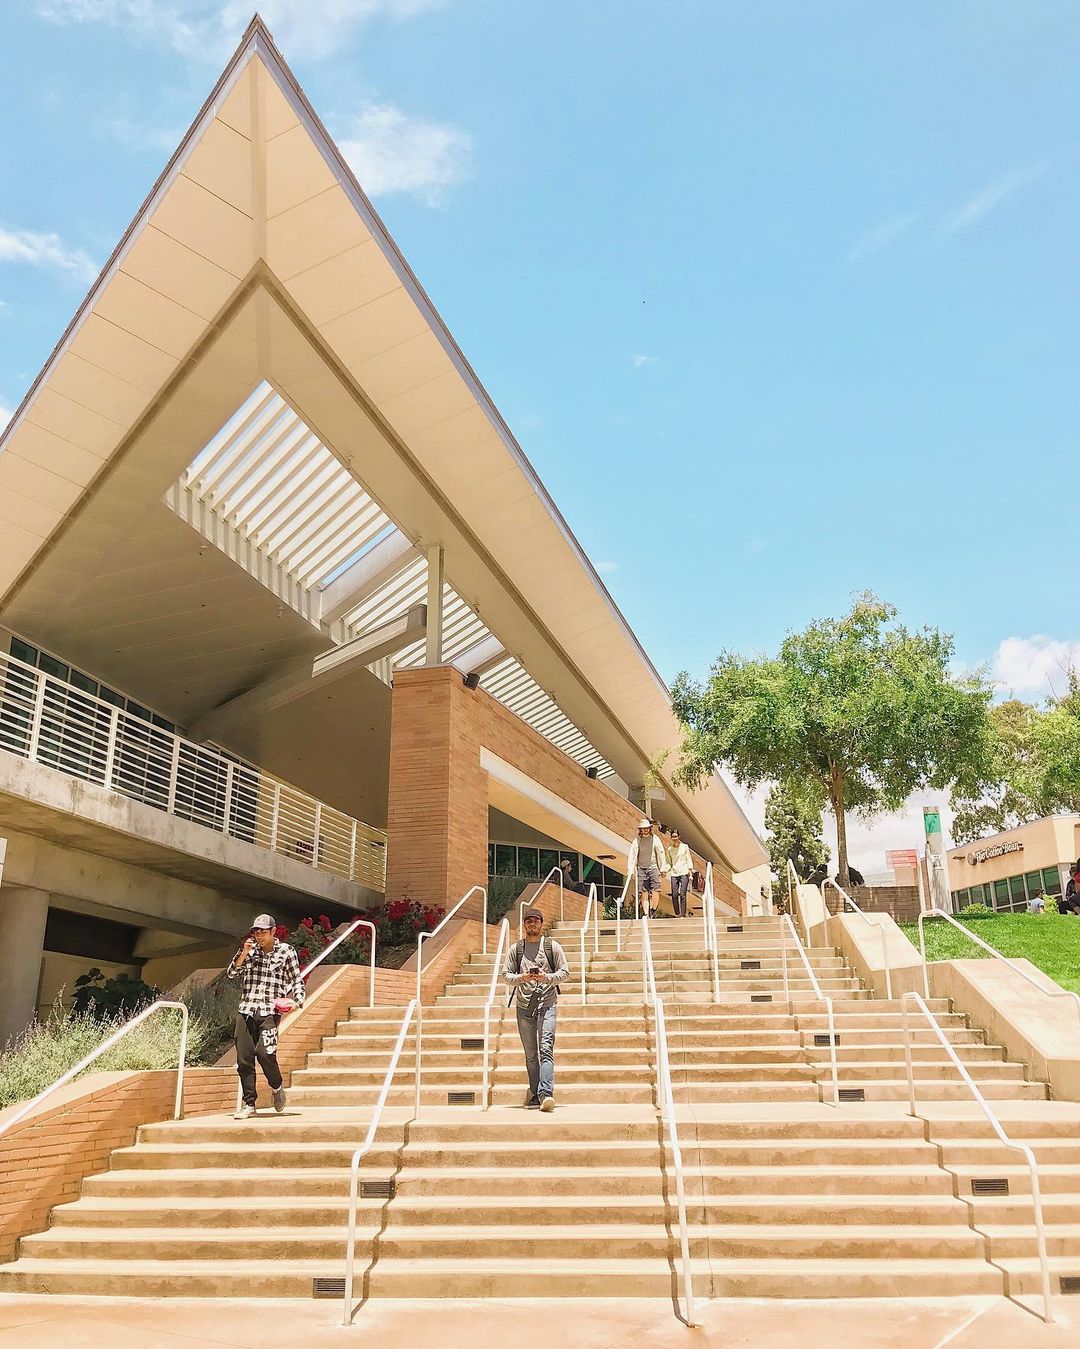 Artistic angle of HUB Dining building at UCR in Riverside, CA. Photo by Instagram user @lifeatucr.